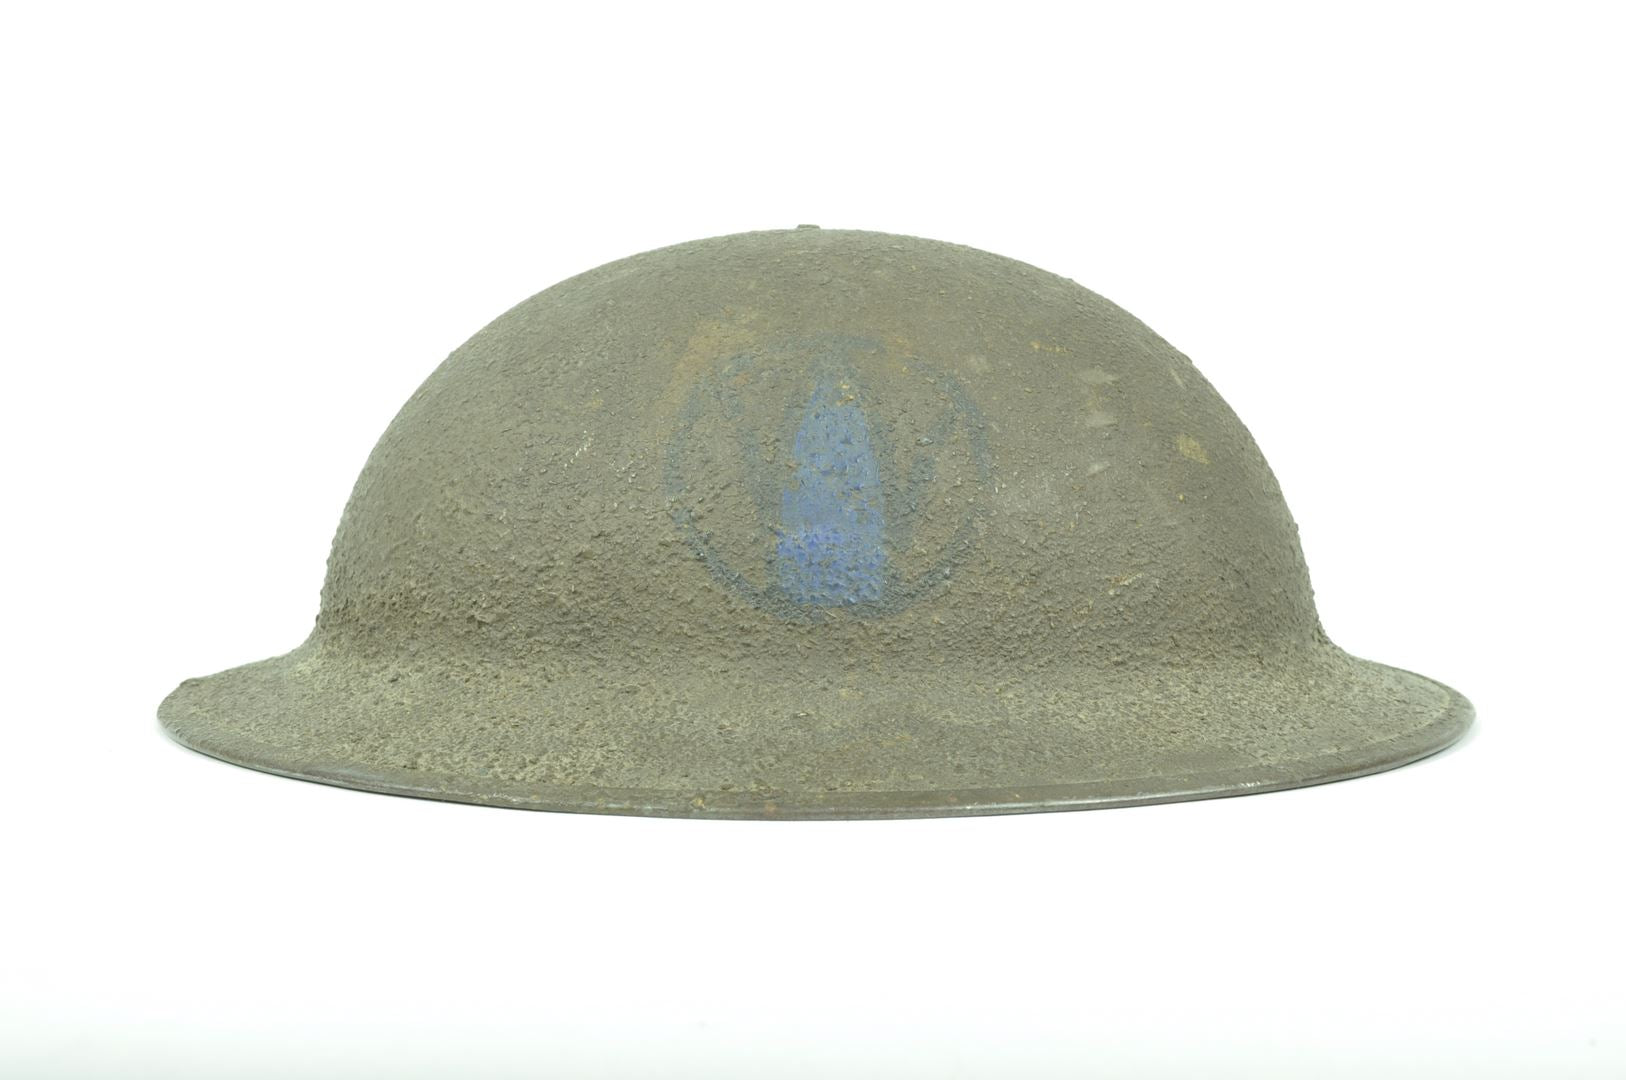 Casque US 17 double insignes 89th infantry division